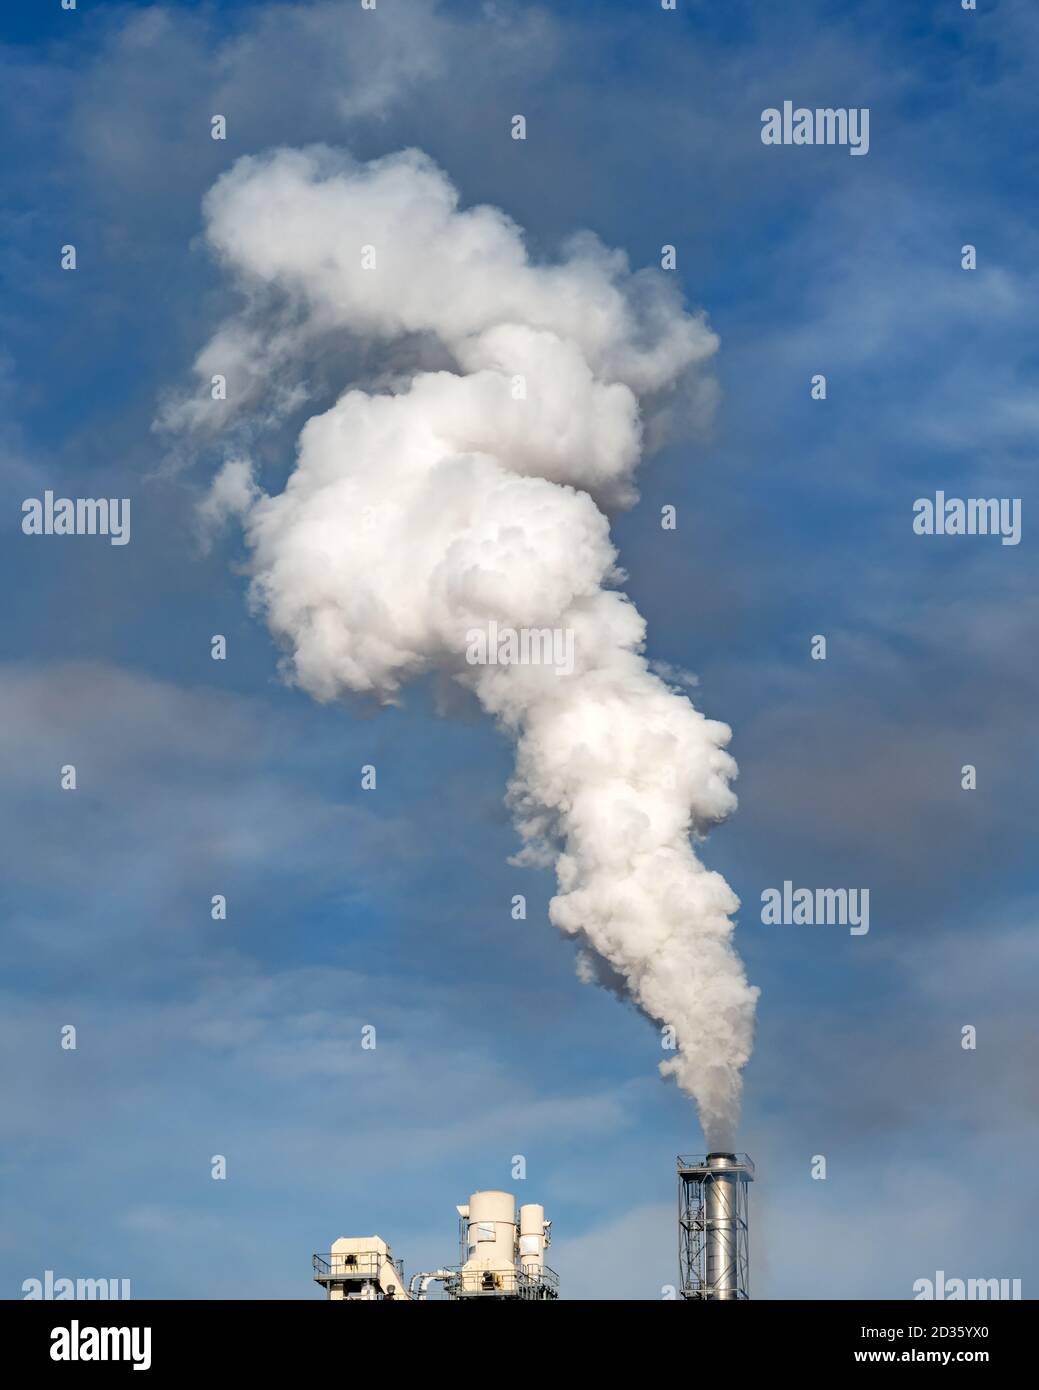 Smoke coming from the chimneys of the plant factory. Air pollution concept Stock Photo